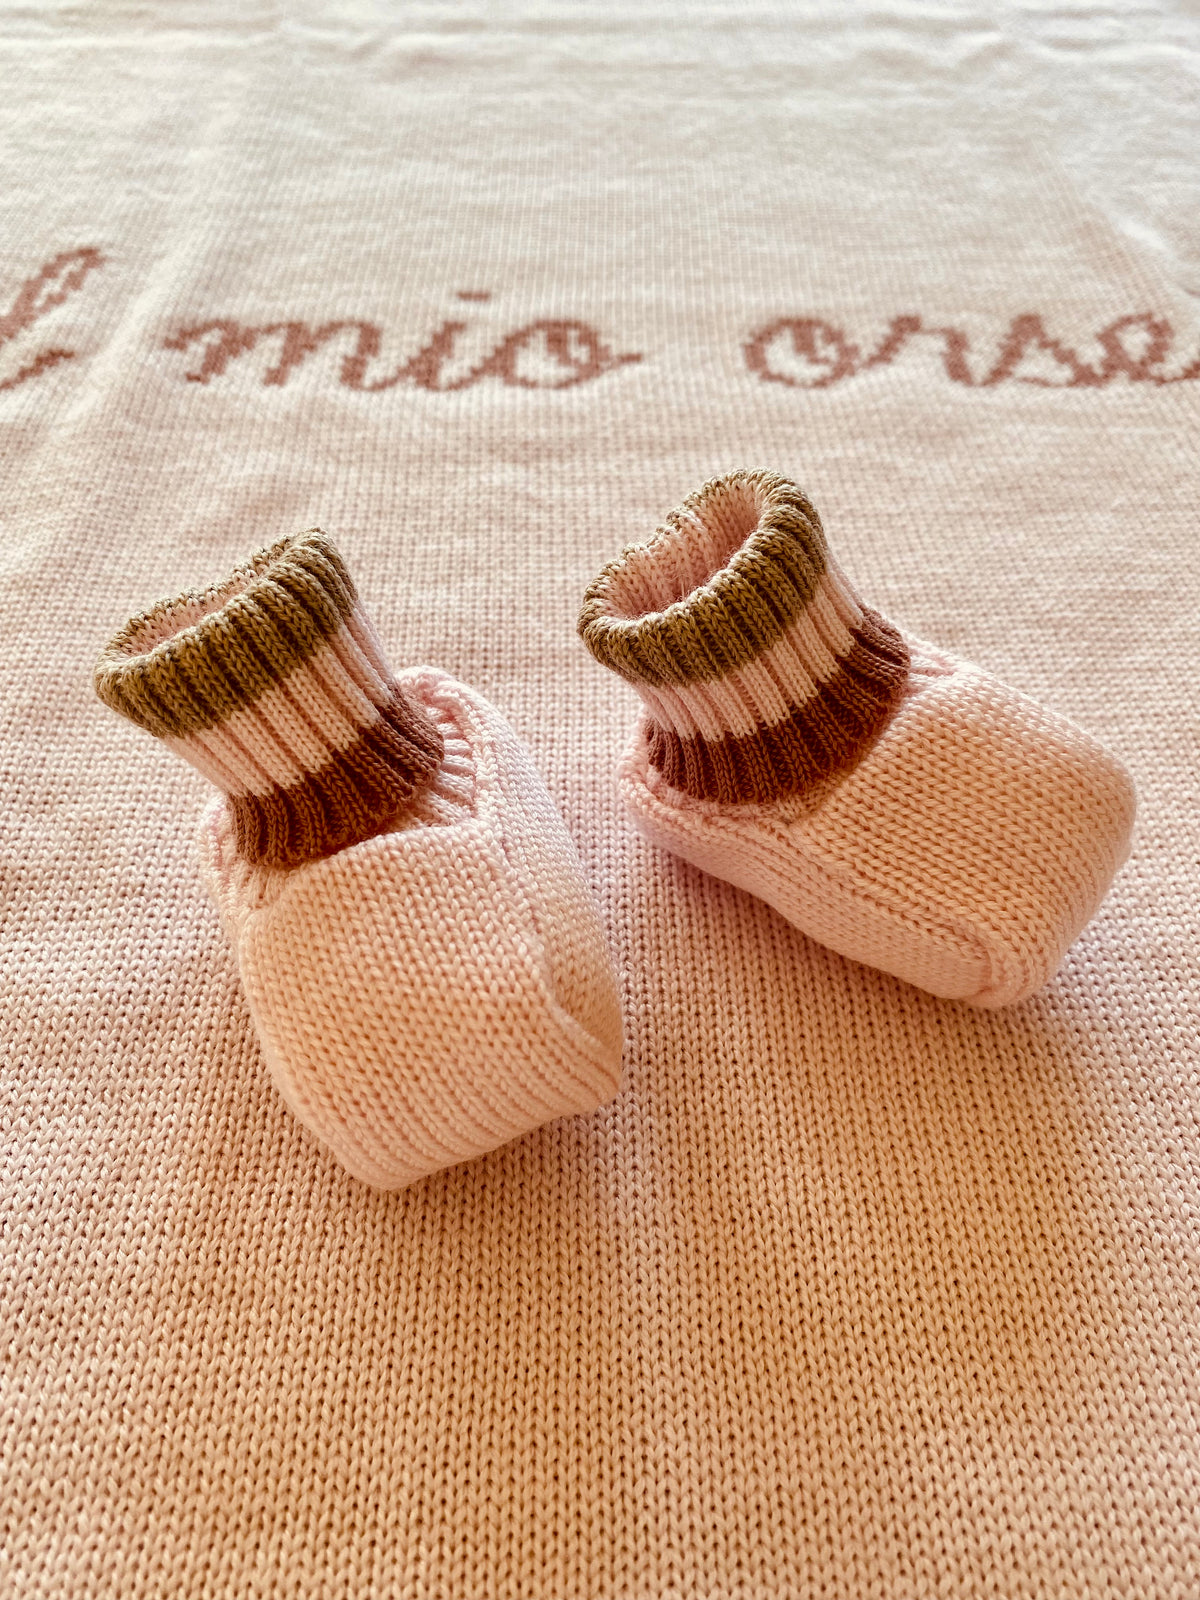 Wool romper for her IL MIO ORSETTO - Marlu°® Winter collection